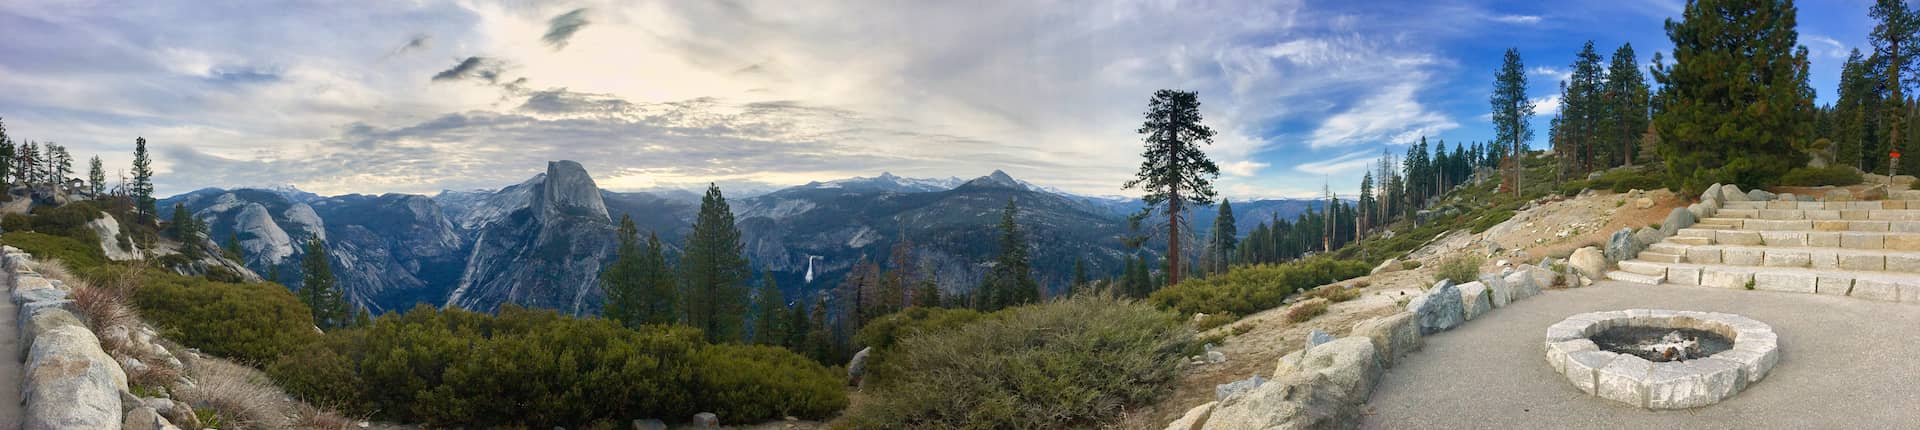 Glacier Point panoramic view of Half Dome and Nevada Fall